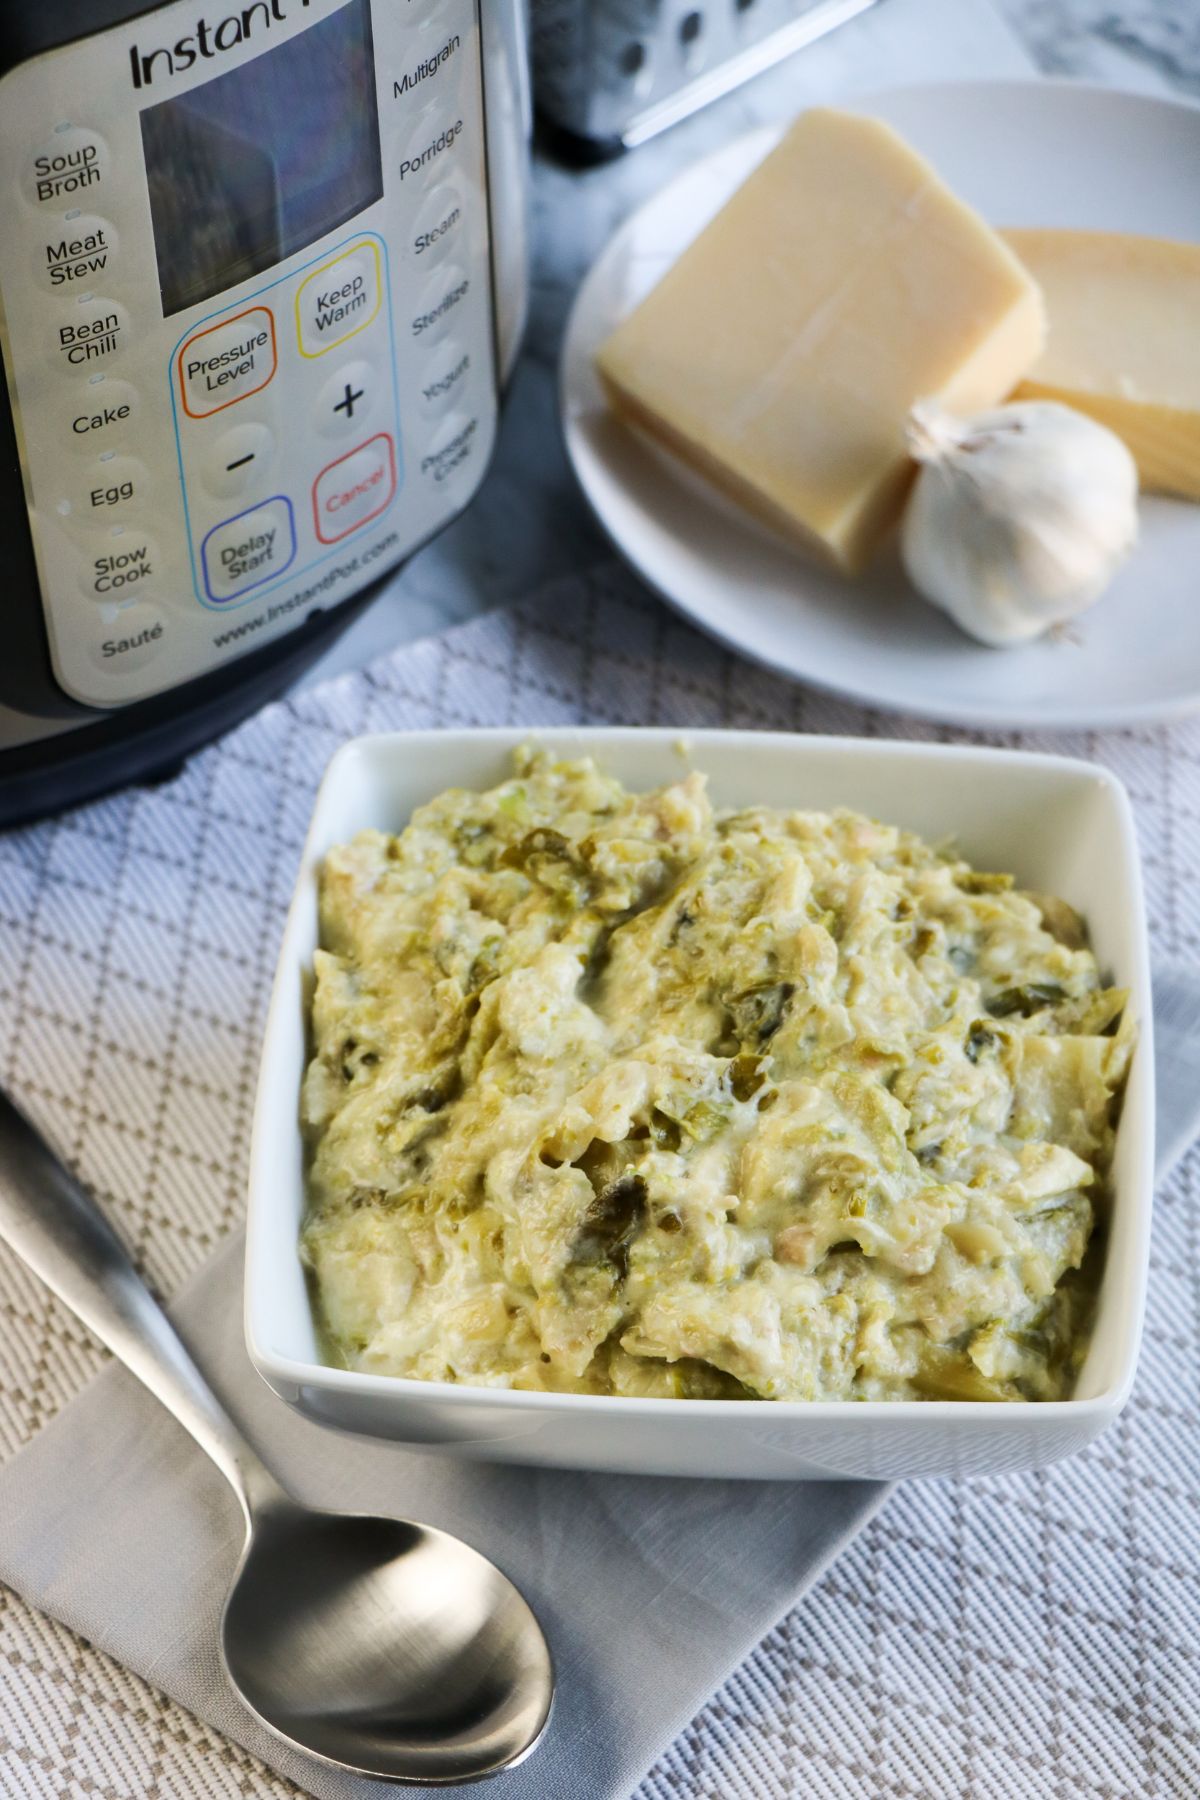 A vertical image of Instant Pot Creamed Brussel Sprouts in a white serving bowl with blocks of parmesan, garlic, and the Instant Pot in the background.